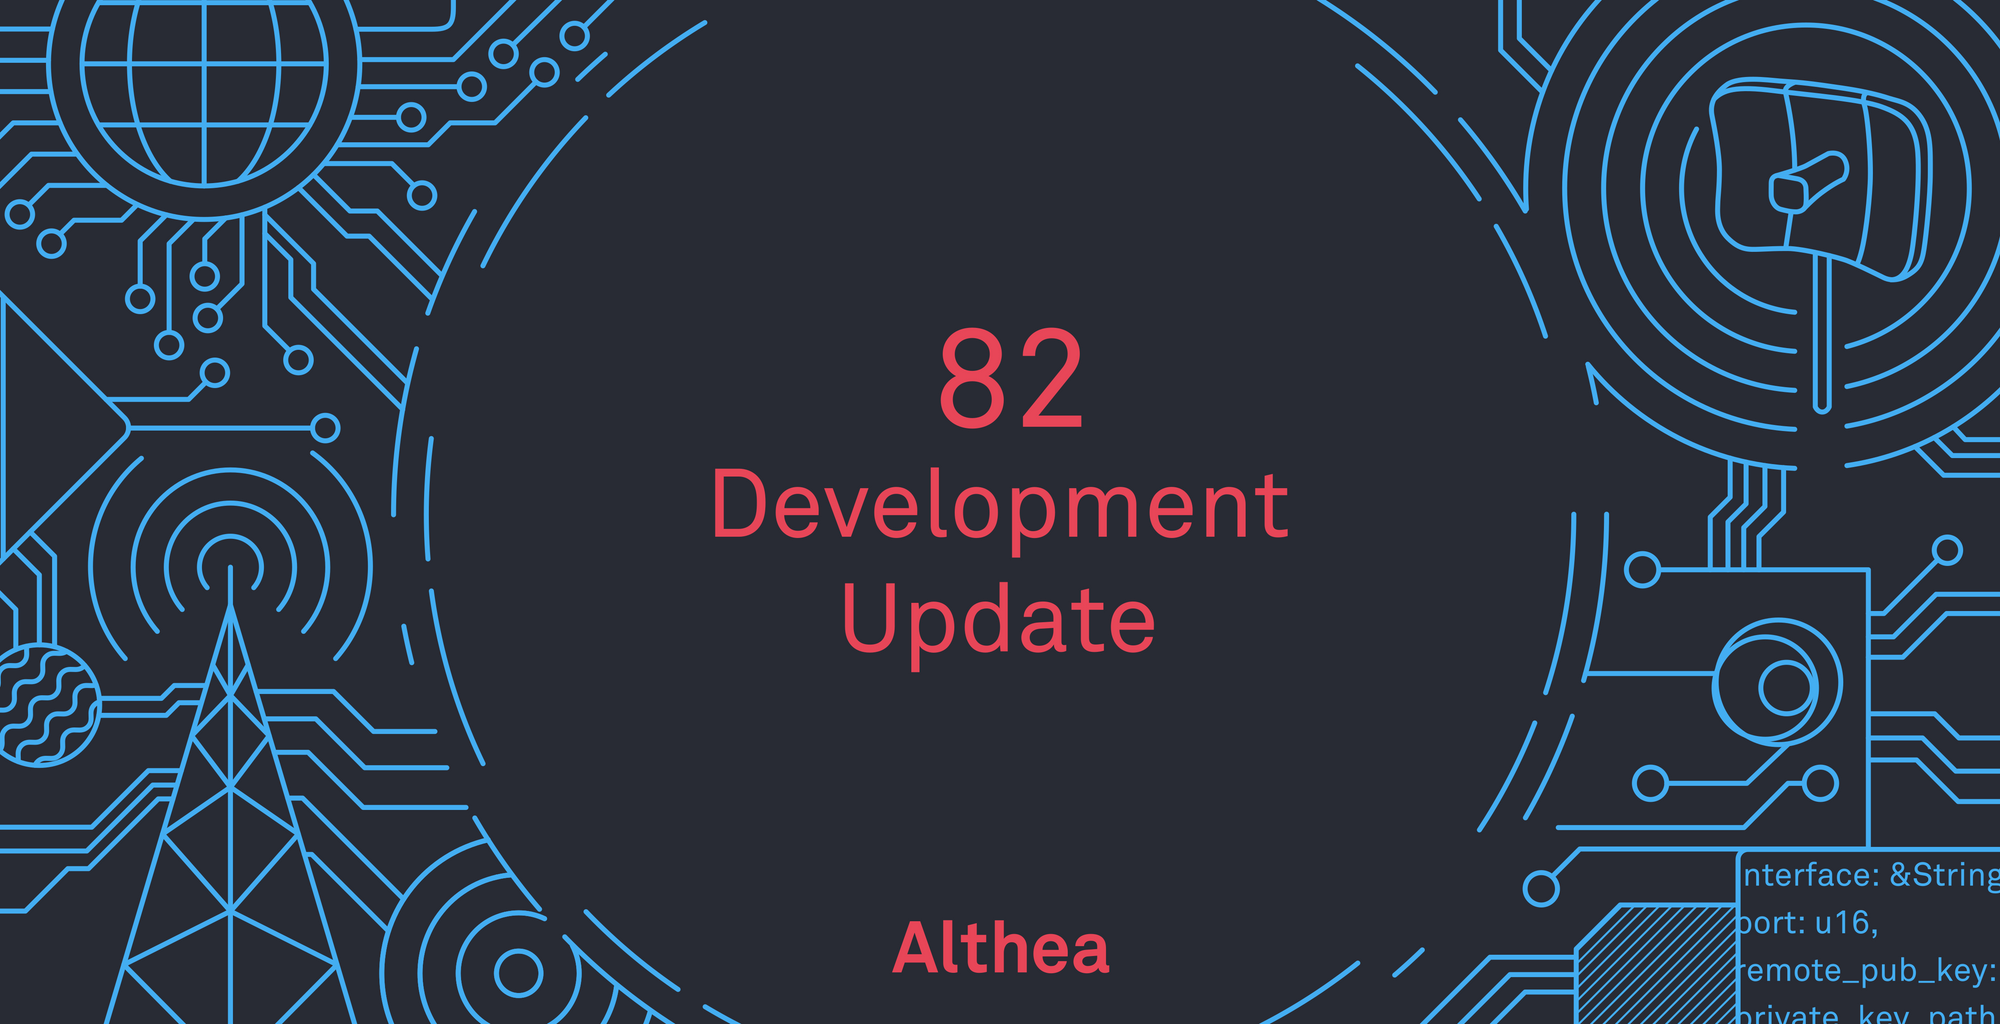 Althea Development Update #82: Direct router deposit with Wyre!